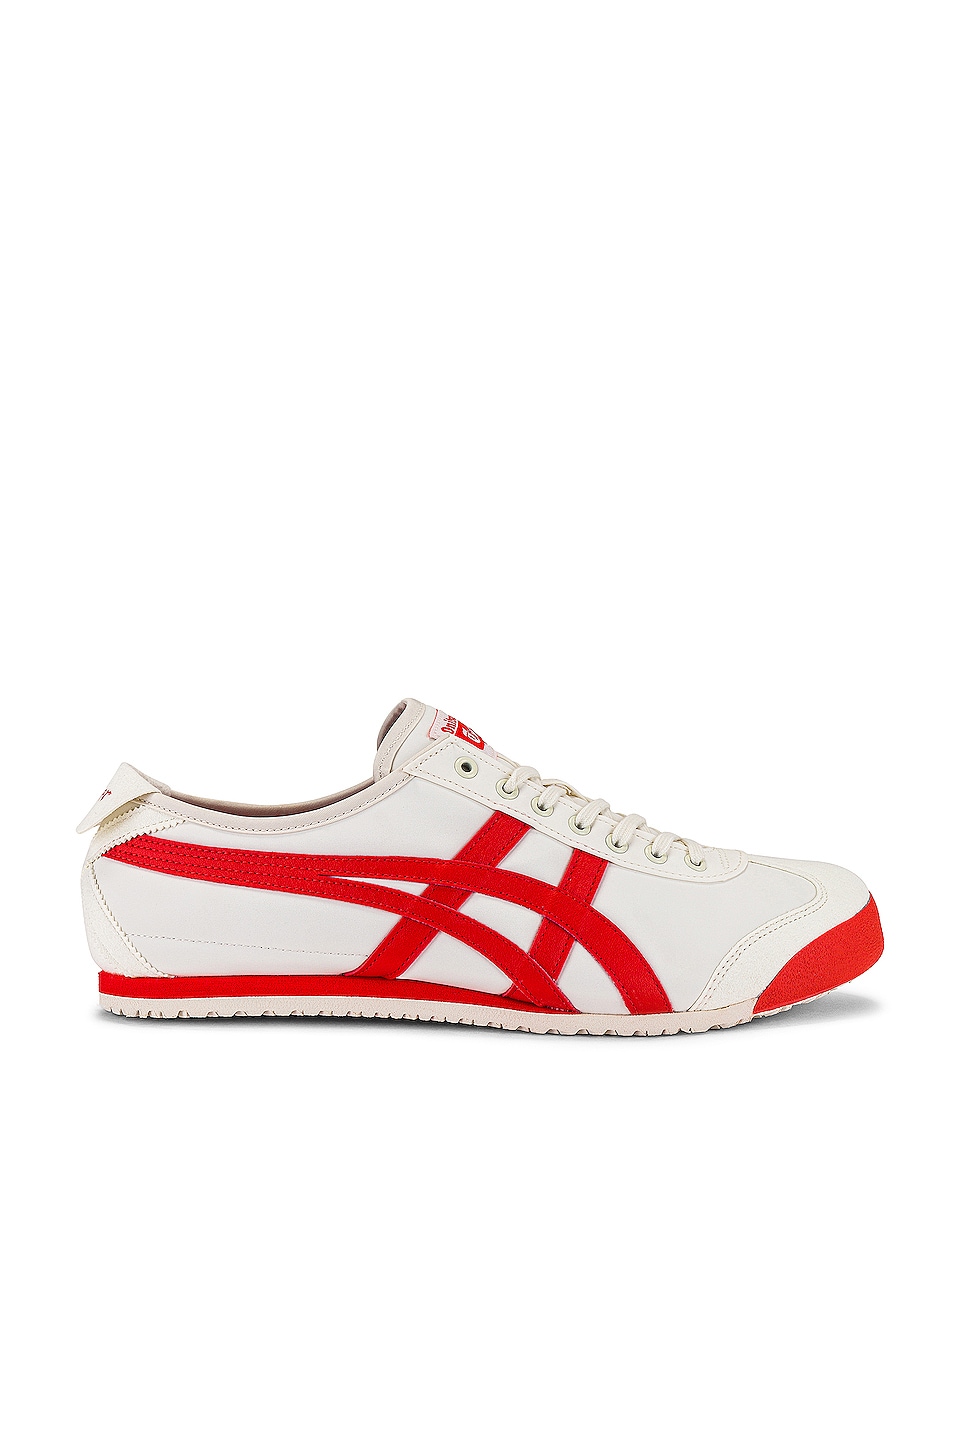 Onitsuka Tiger Mexico 66 in Cream & Fiery Red | REVOLVE